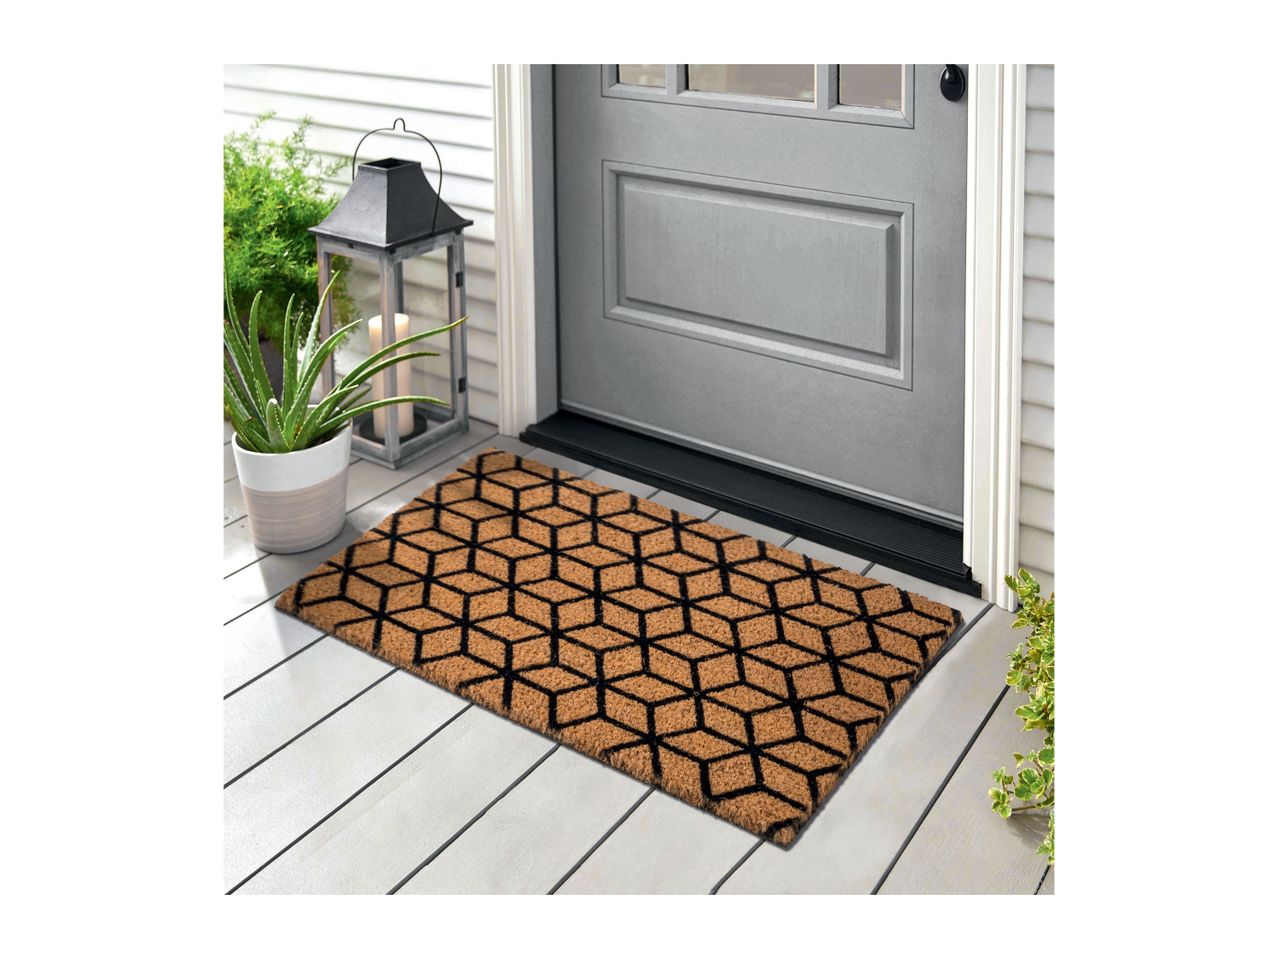 Go to full screen view: Livarno Home Coir Doormat Assorted Designs - Image 6